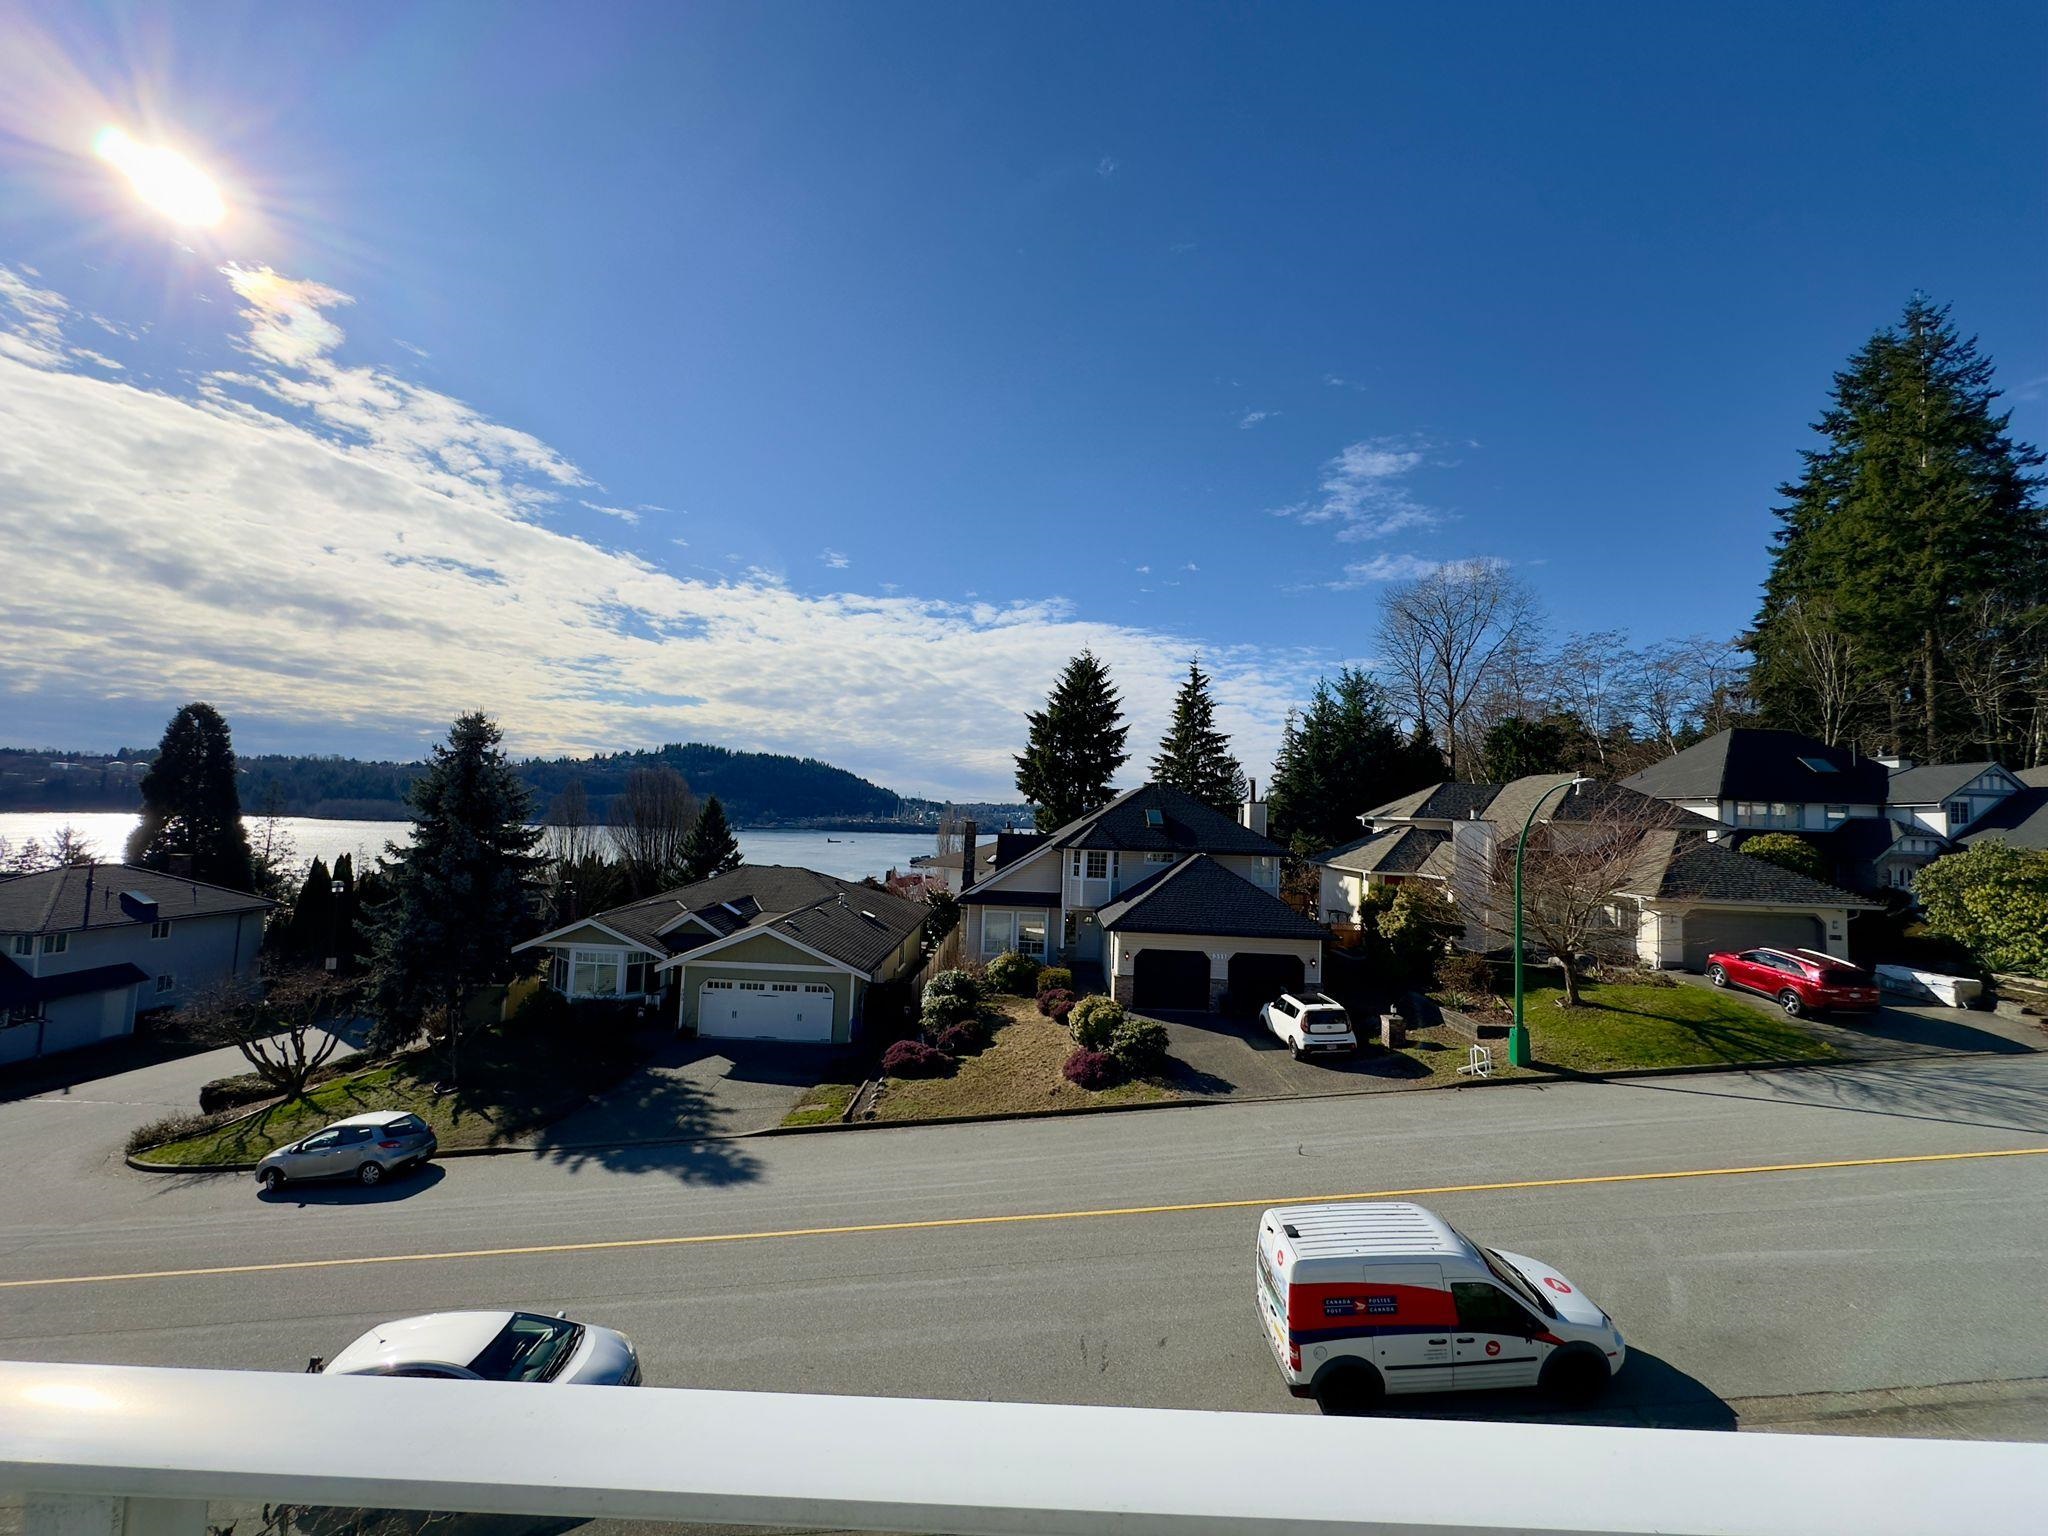 Listing image of 308 ROCHE POINT DRIVE